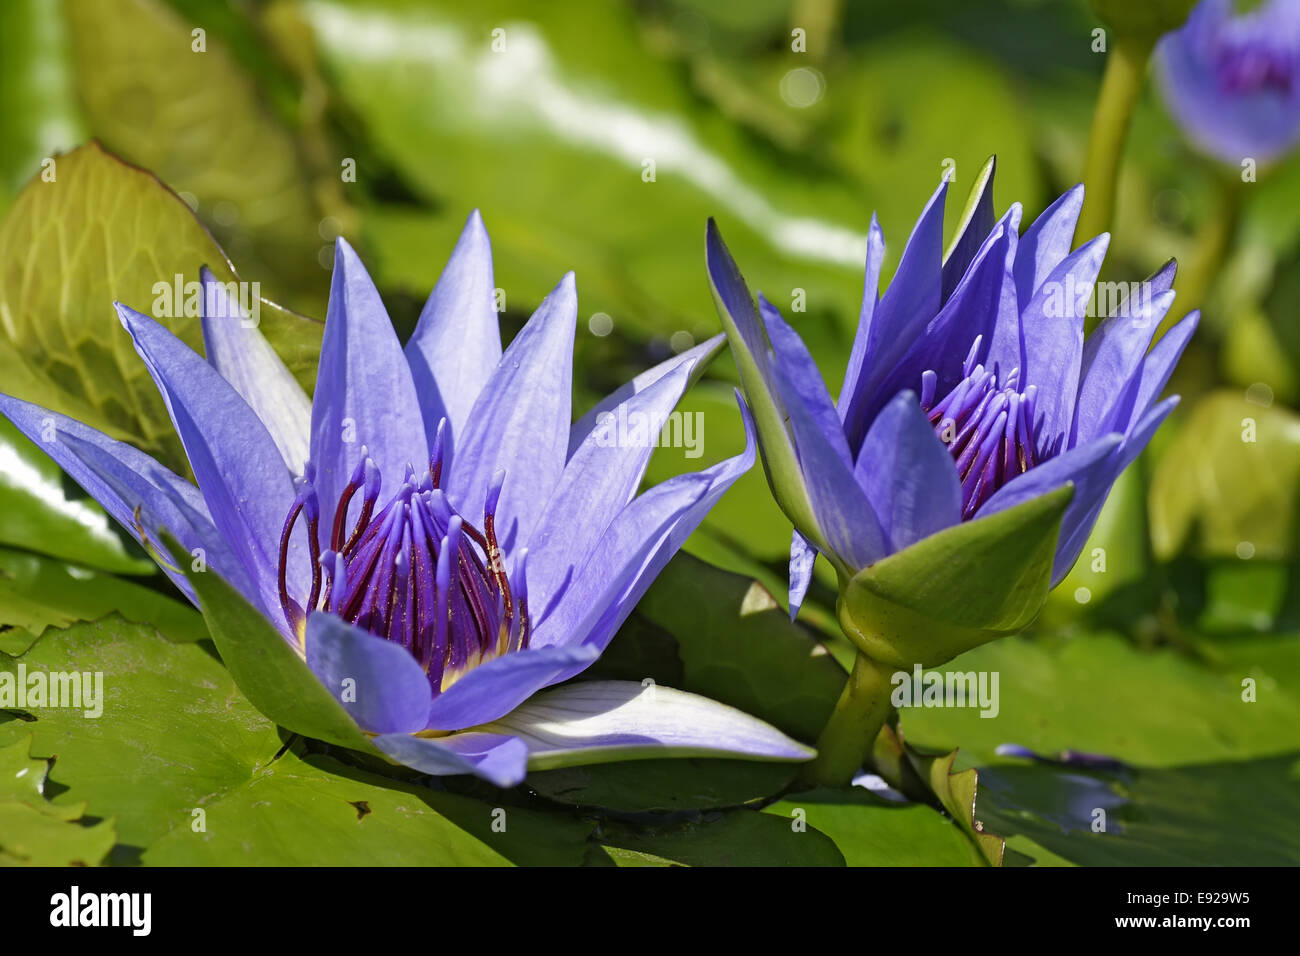 violet water lily, nymphaea Stock Photo